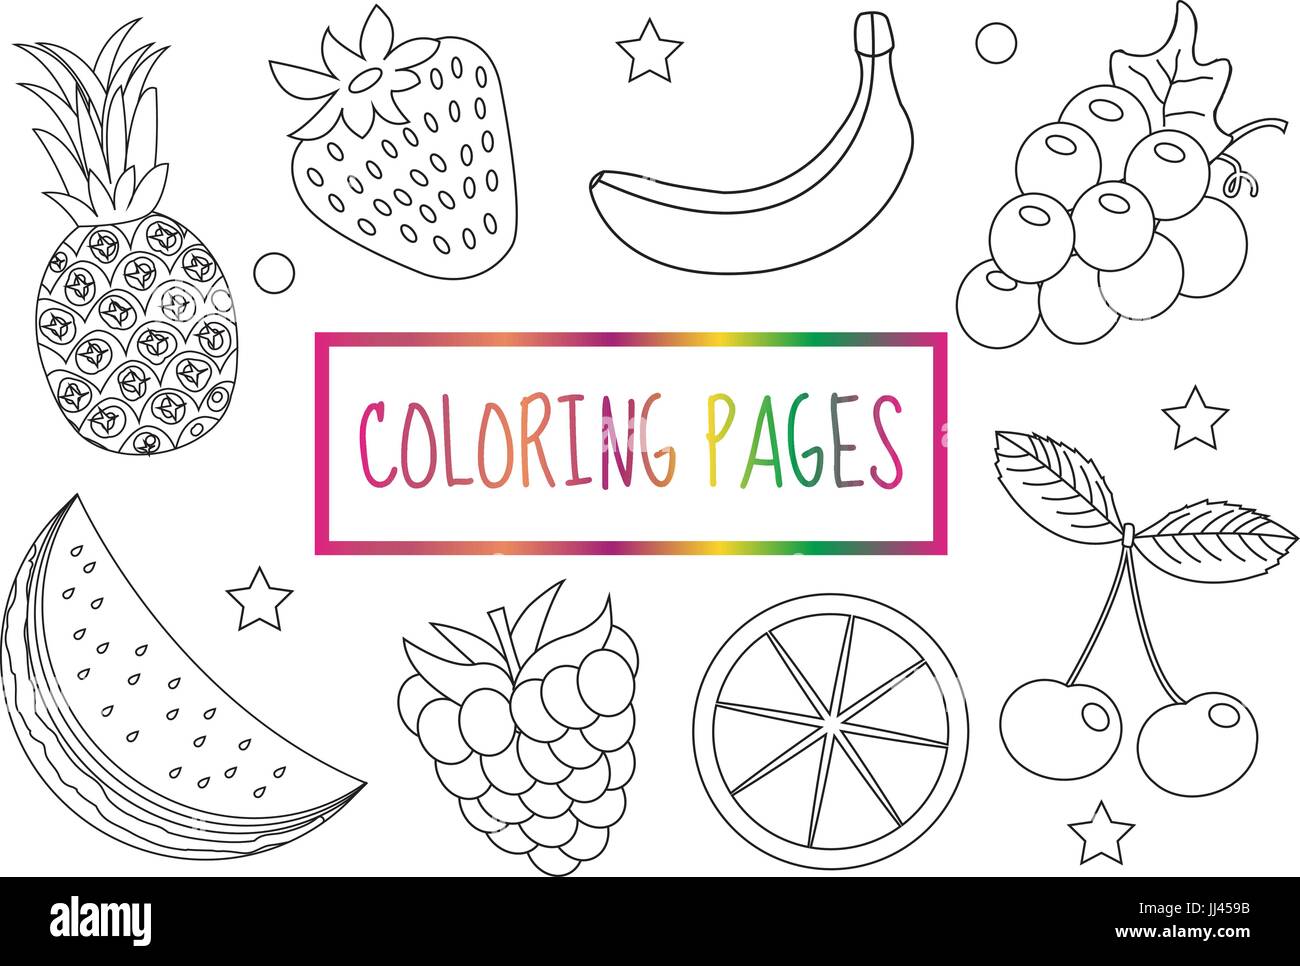 Coloring book page. Fruit set. Sketch, doodle, outline style ...